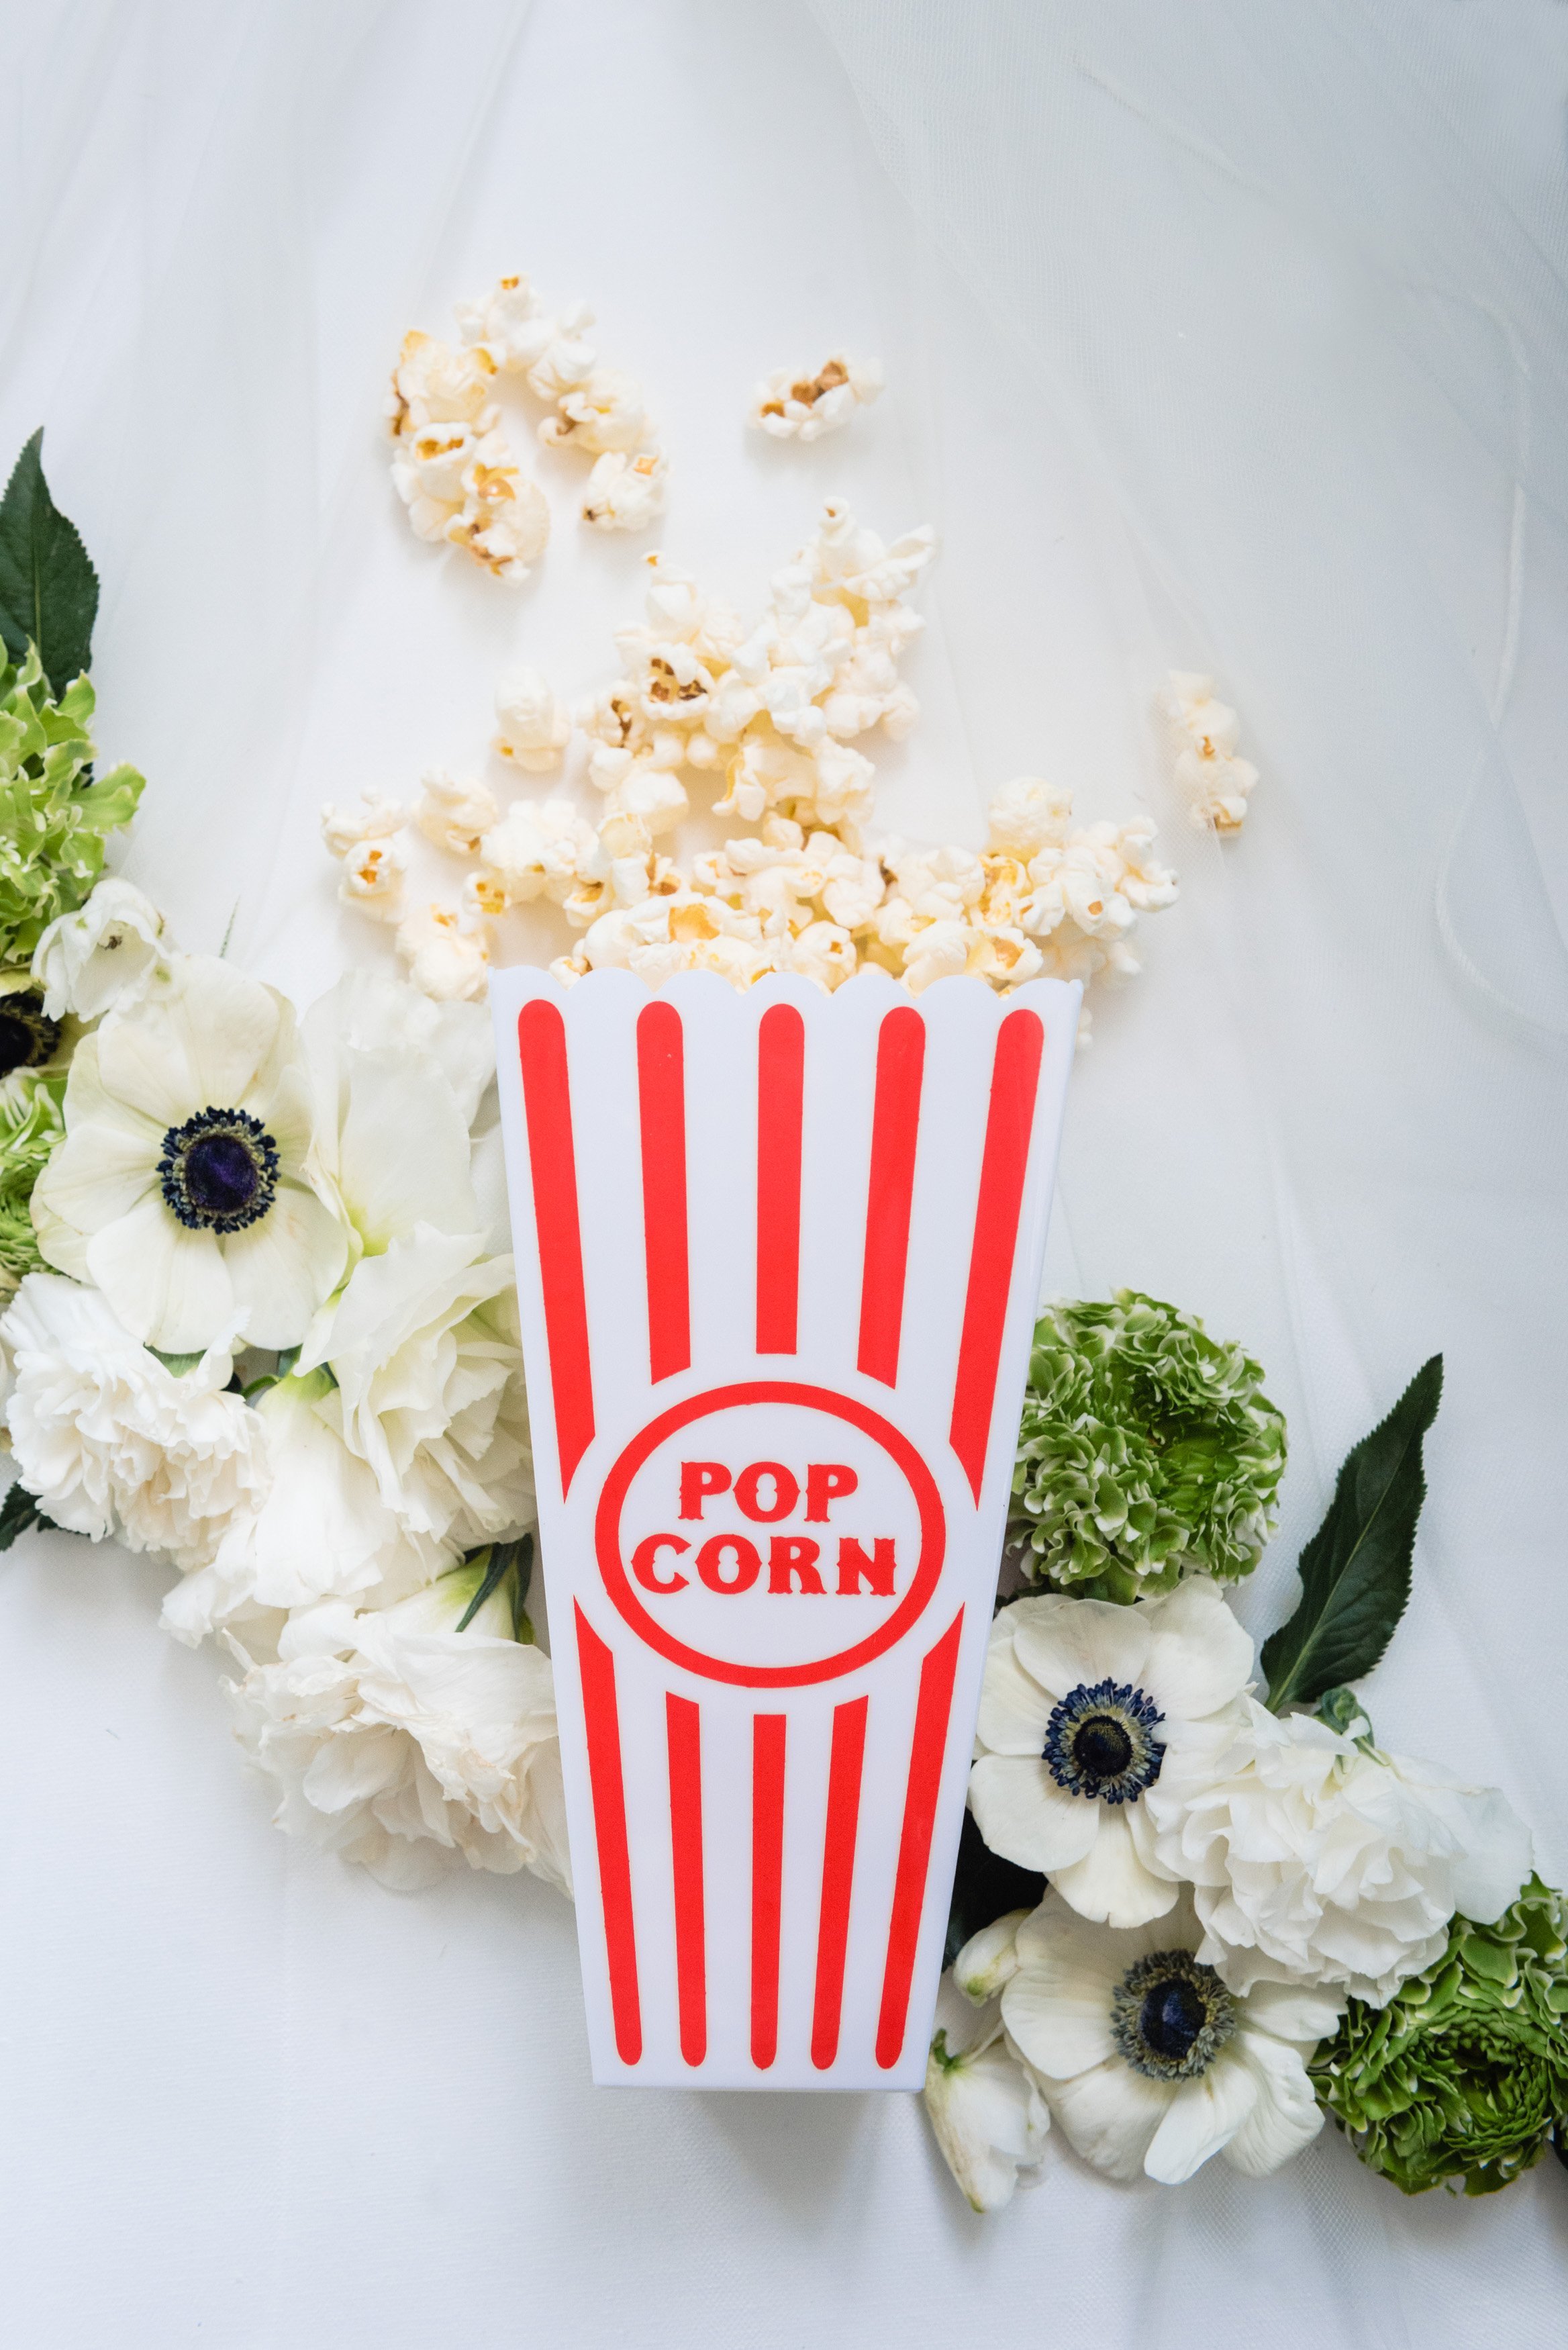 www.santabarbarawedding.com | Catering Connection | Jennifer Lourie Photography | Popcorn Spilling Out of Red and White Box